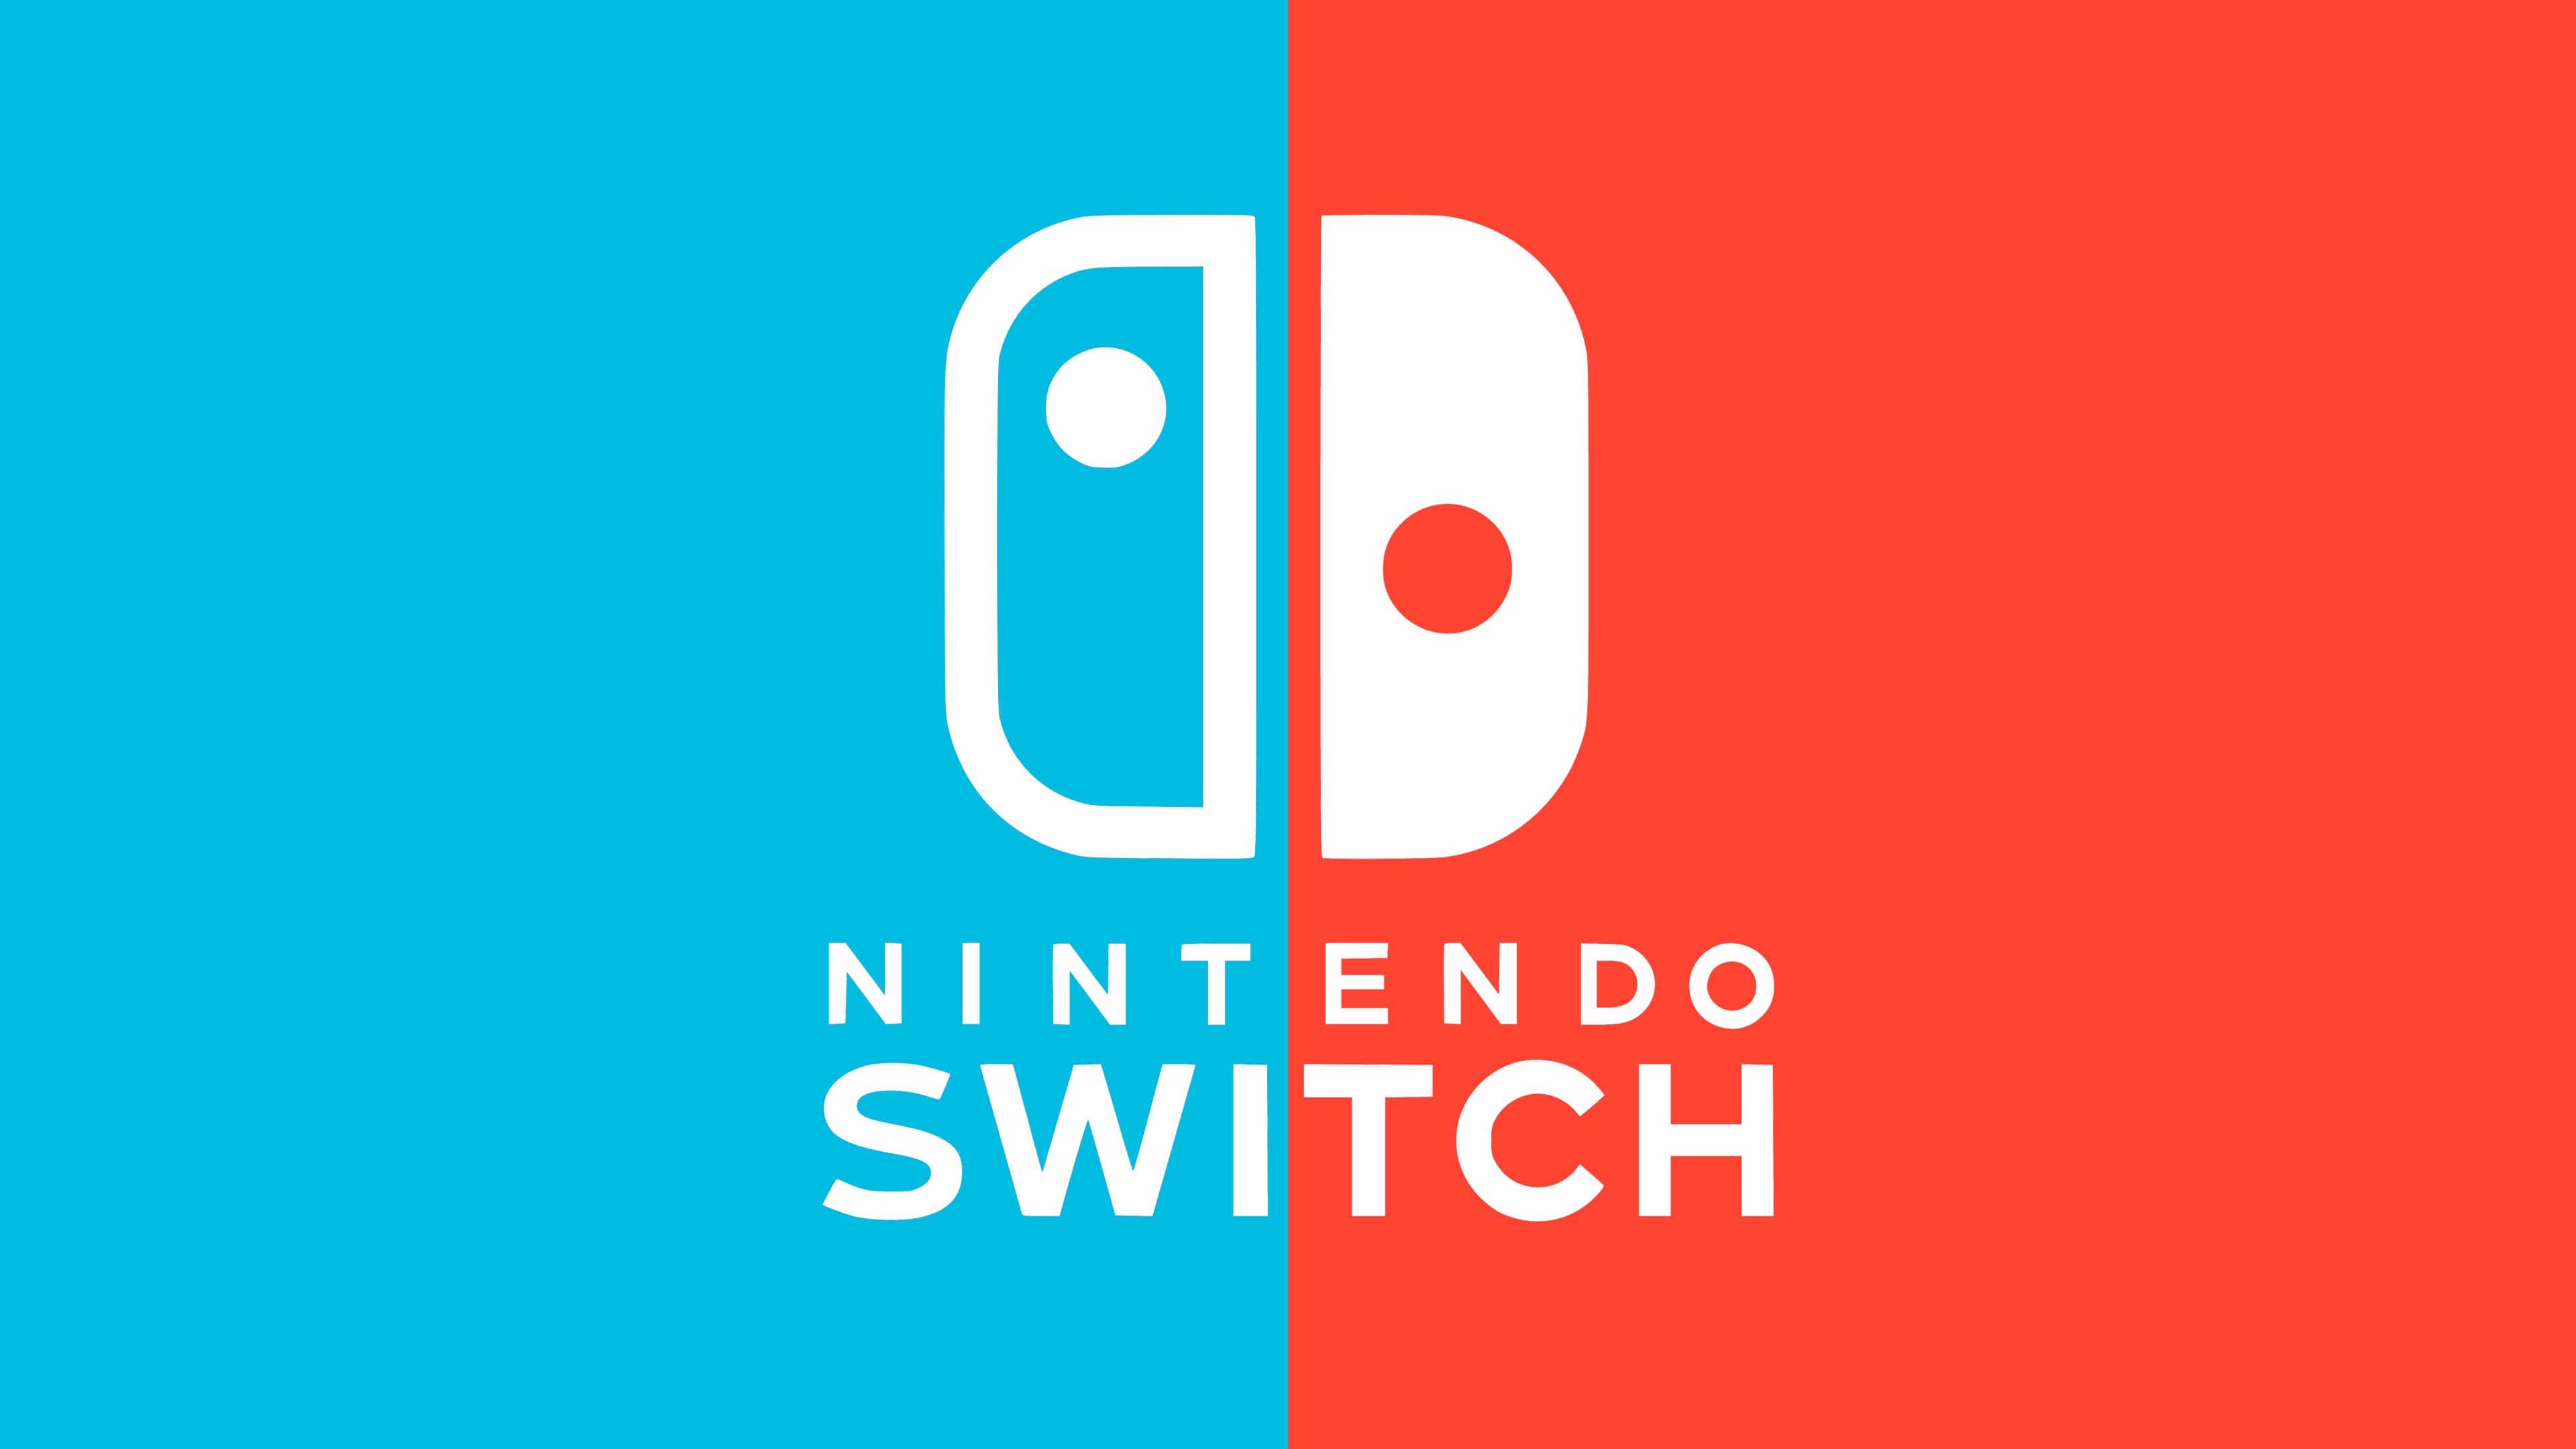 Nintendo Switch - Nintendo's new console is designed to be played at home or on the go - Nintendo